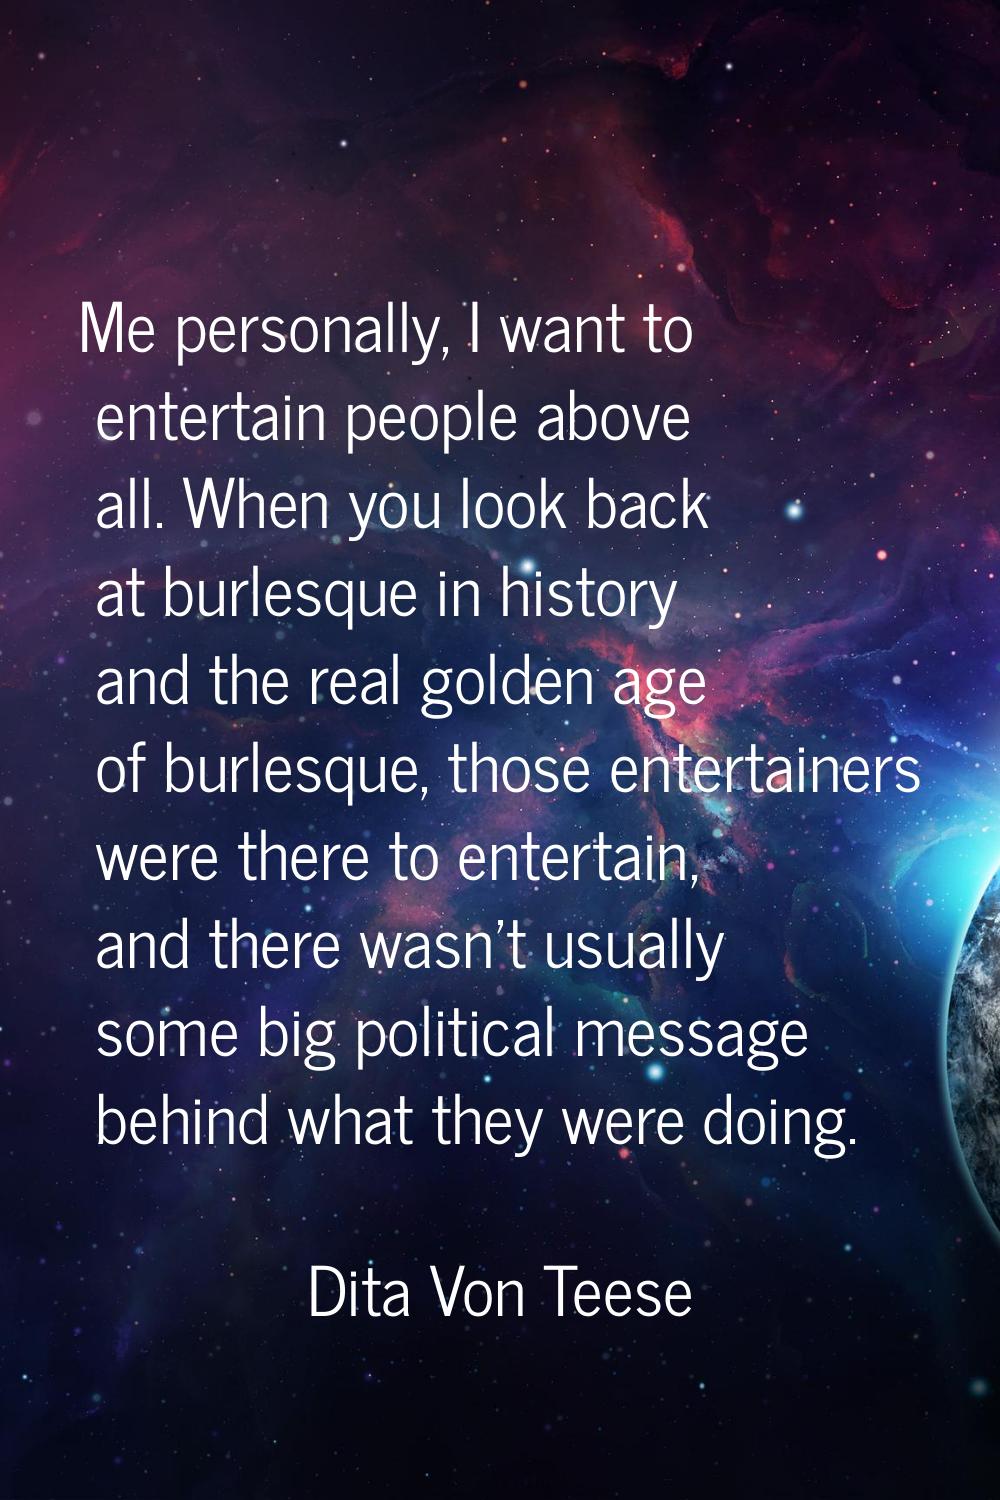 Me personally, I want to entertain people above all. When you look back at burlesque in history and